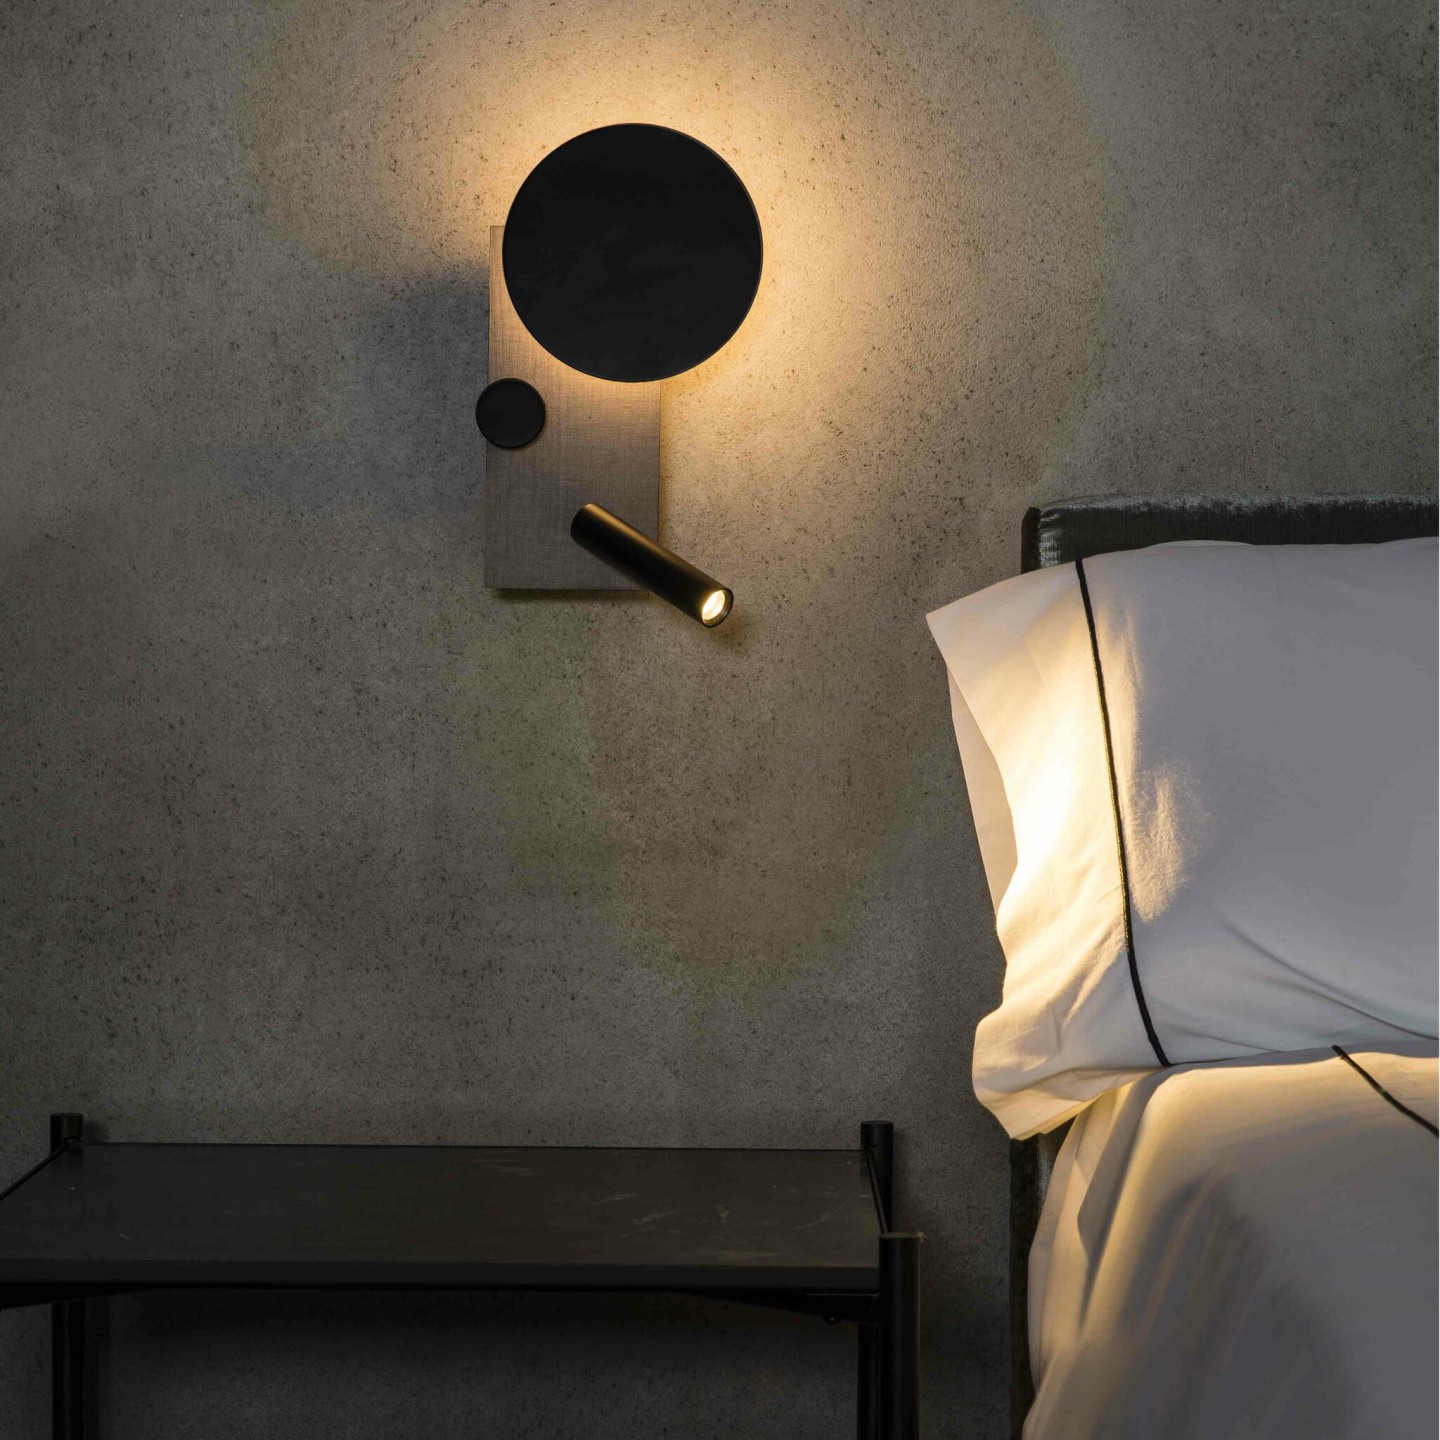 THE KLEE LED WALL LAMP